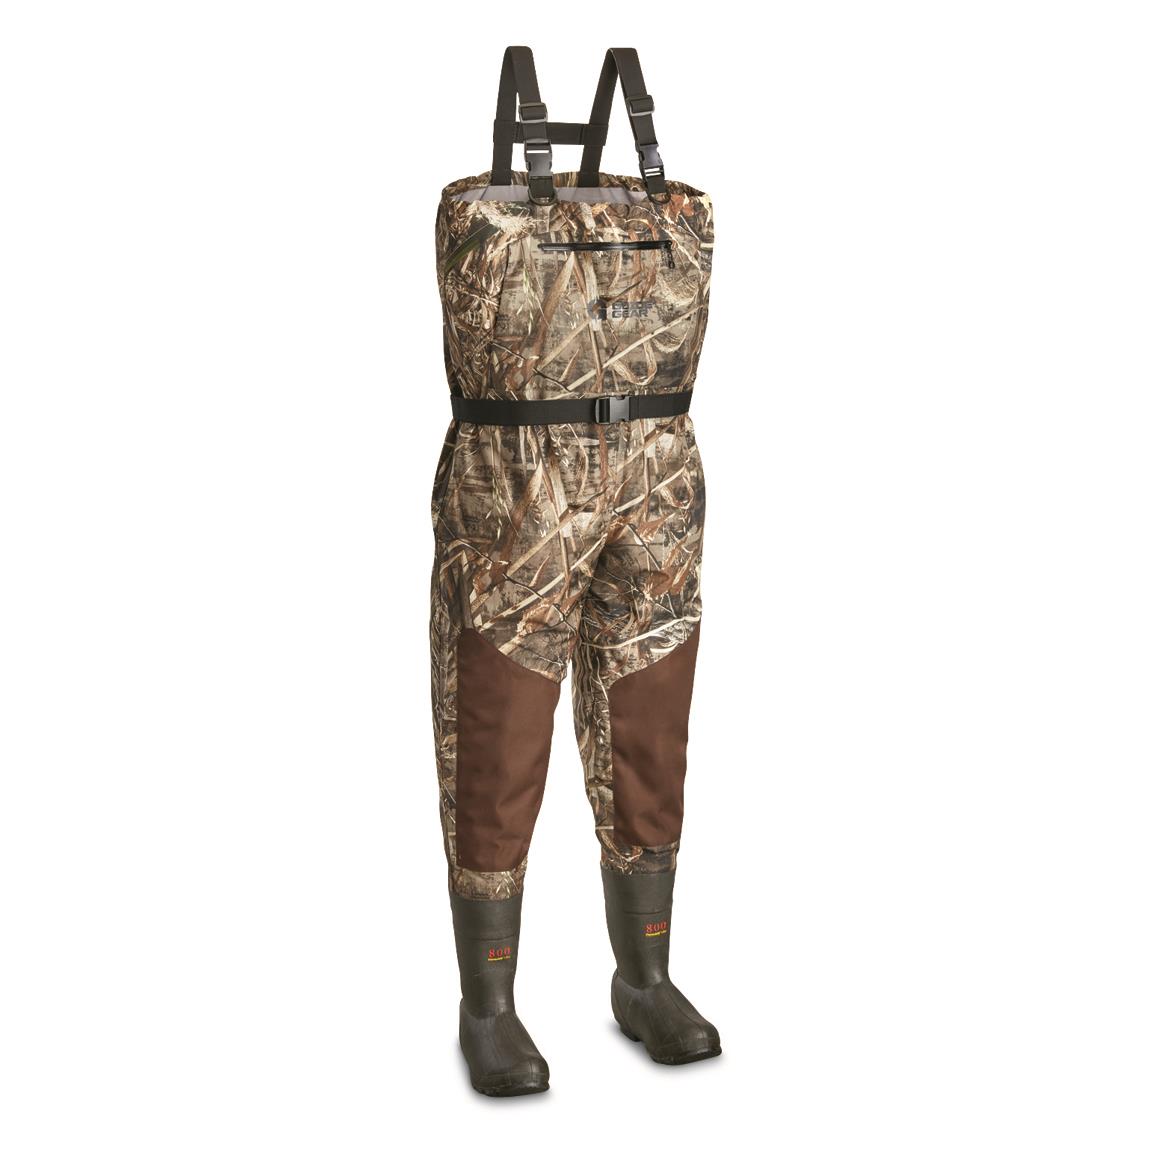 Guide Gear Men's Breathable Insulated Bootfoot Chest Waders, 800-gram, Stout Sizes, Realtree MAX-5®